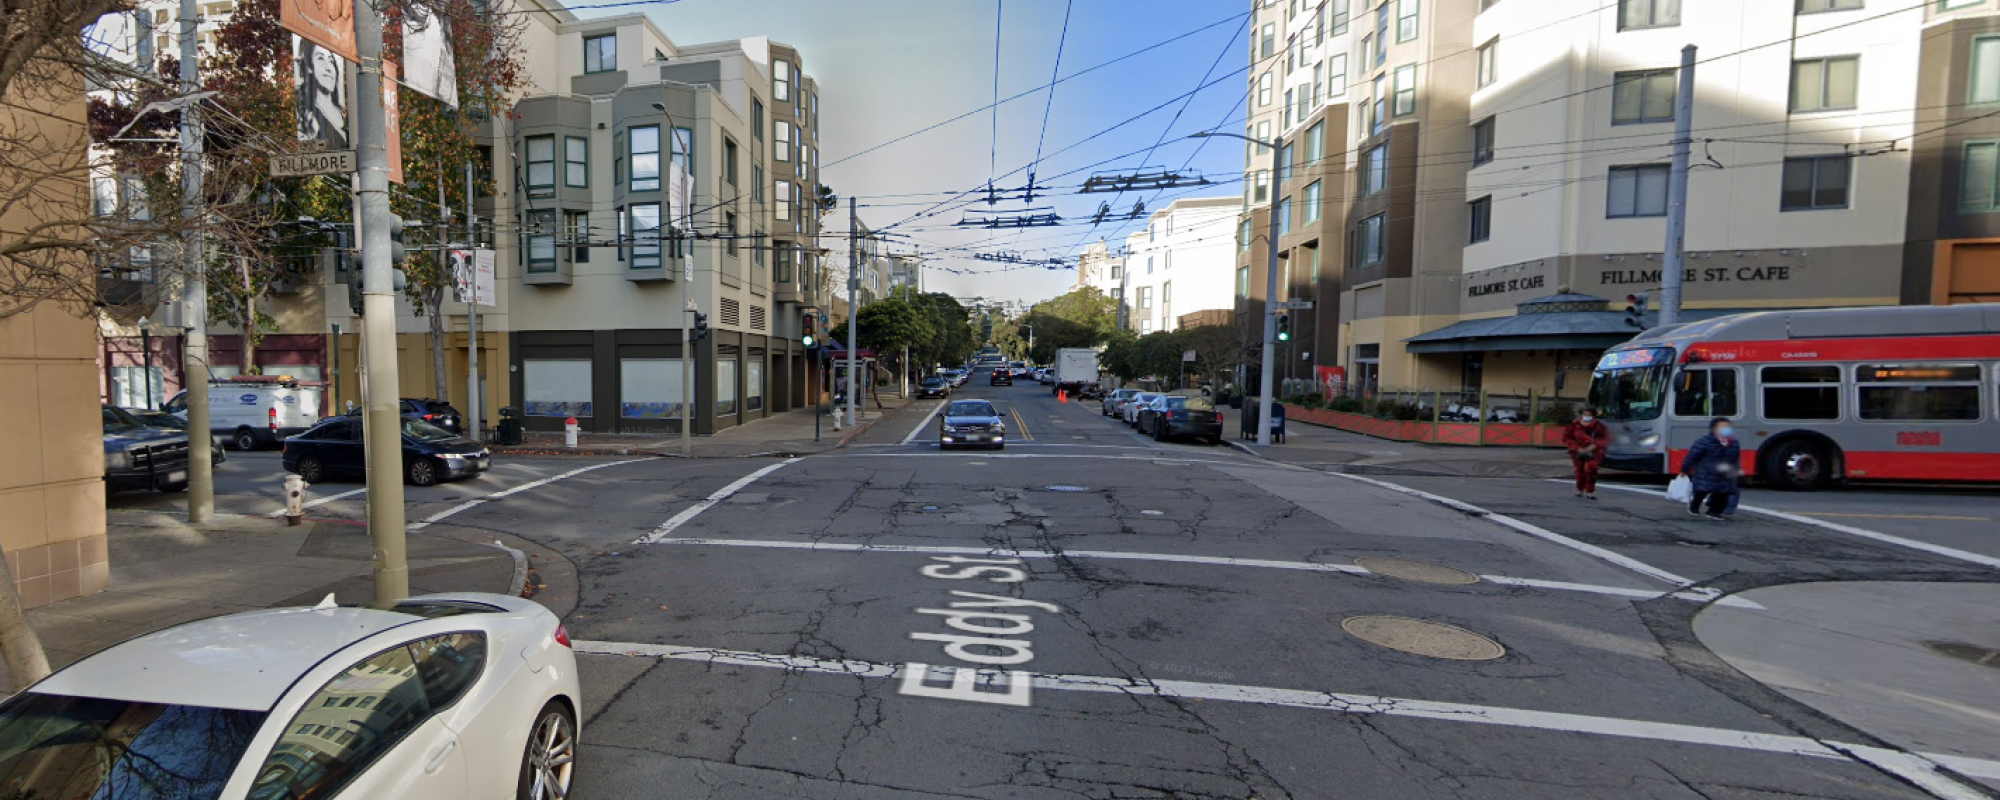 Street level view of eddy and fillmore